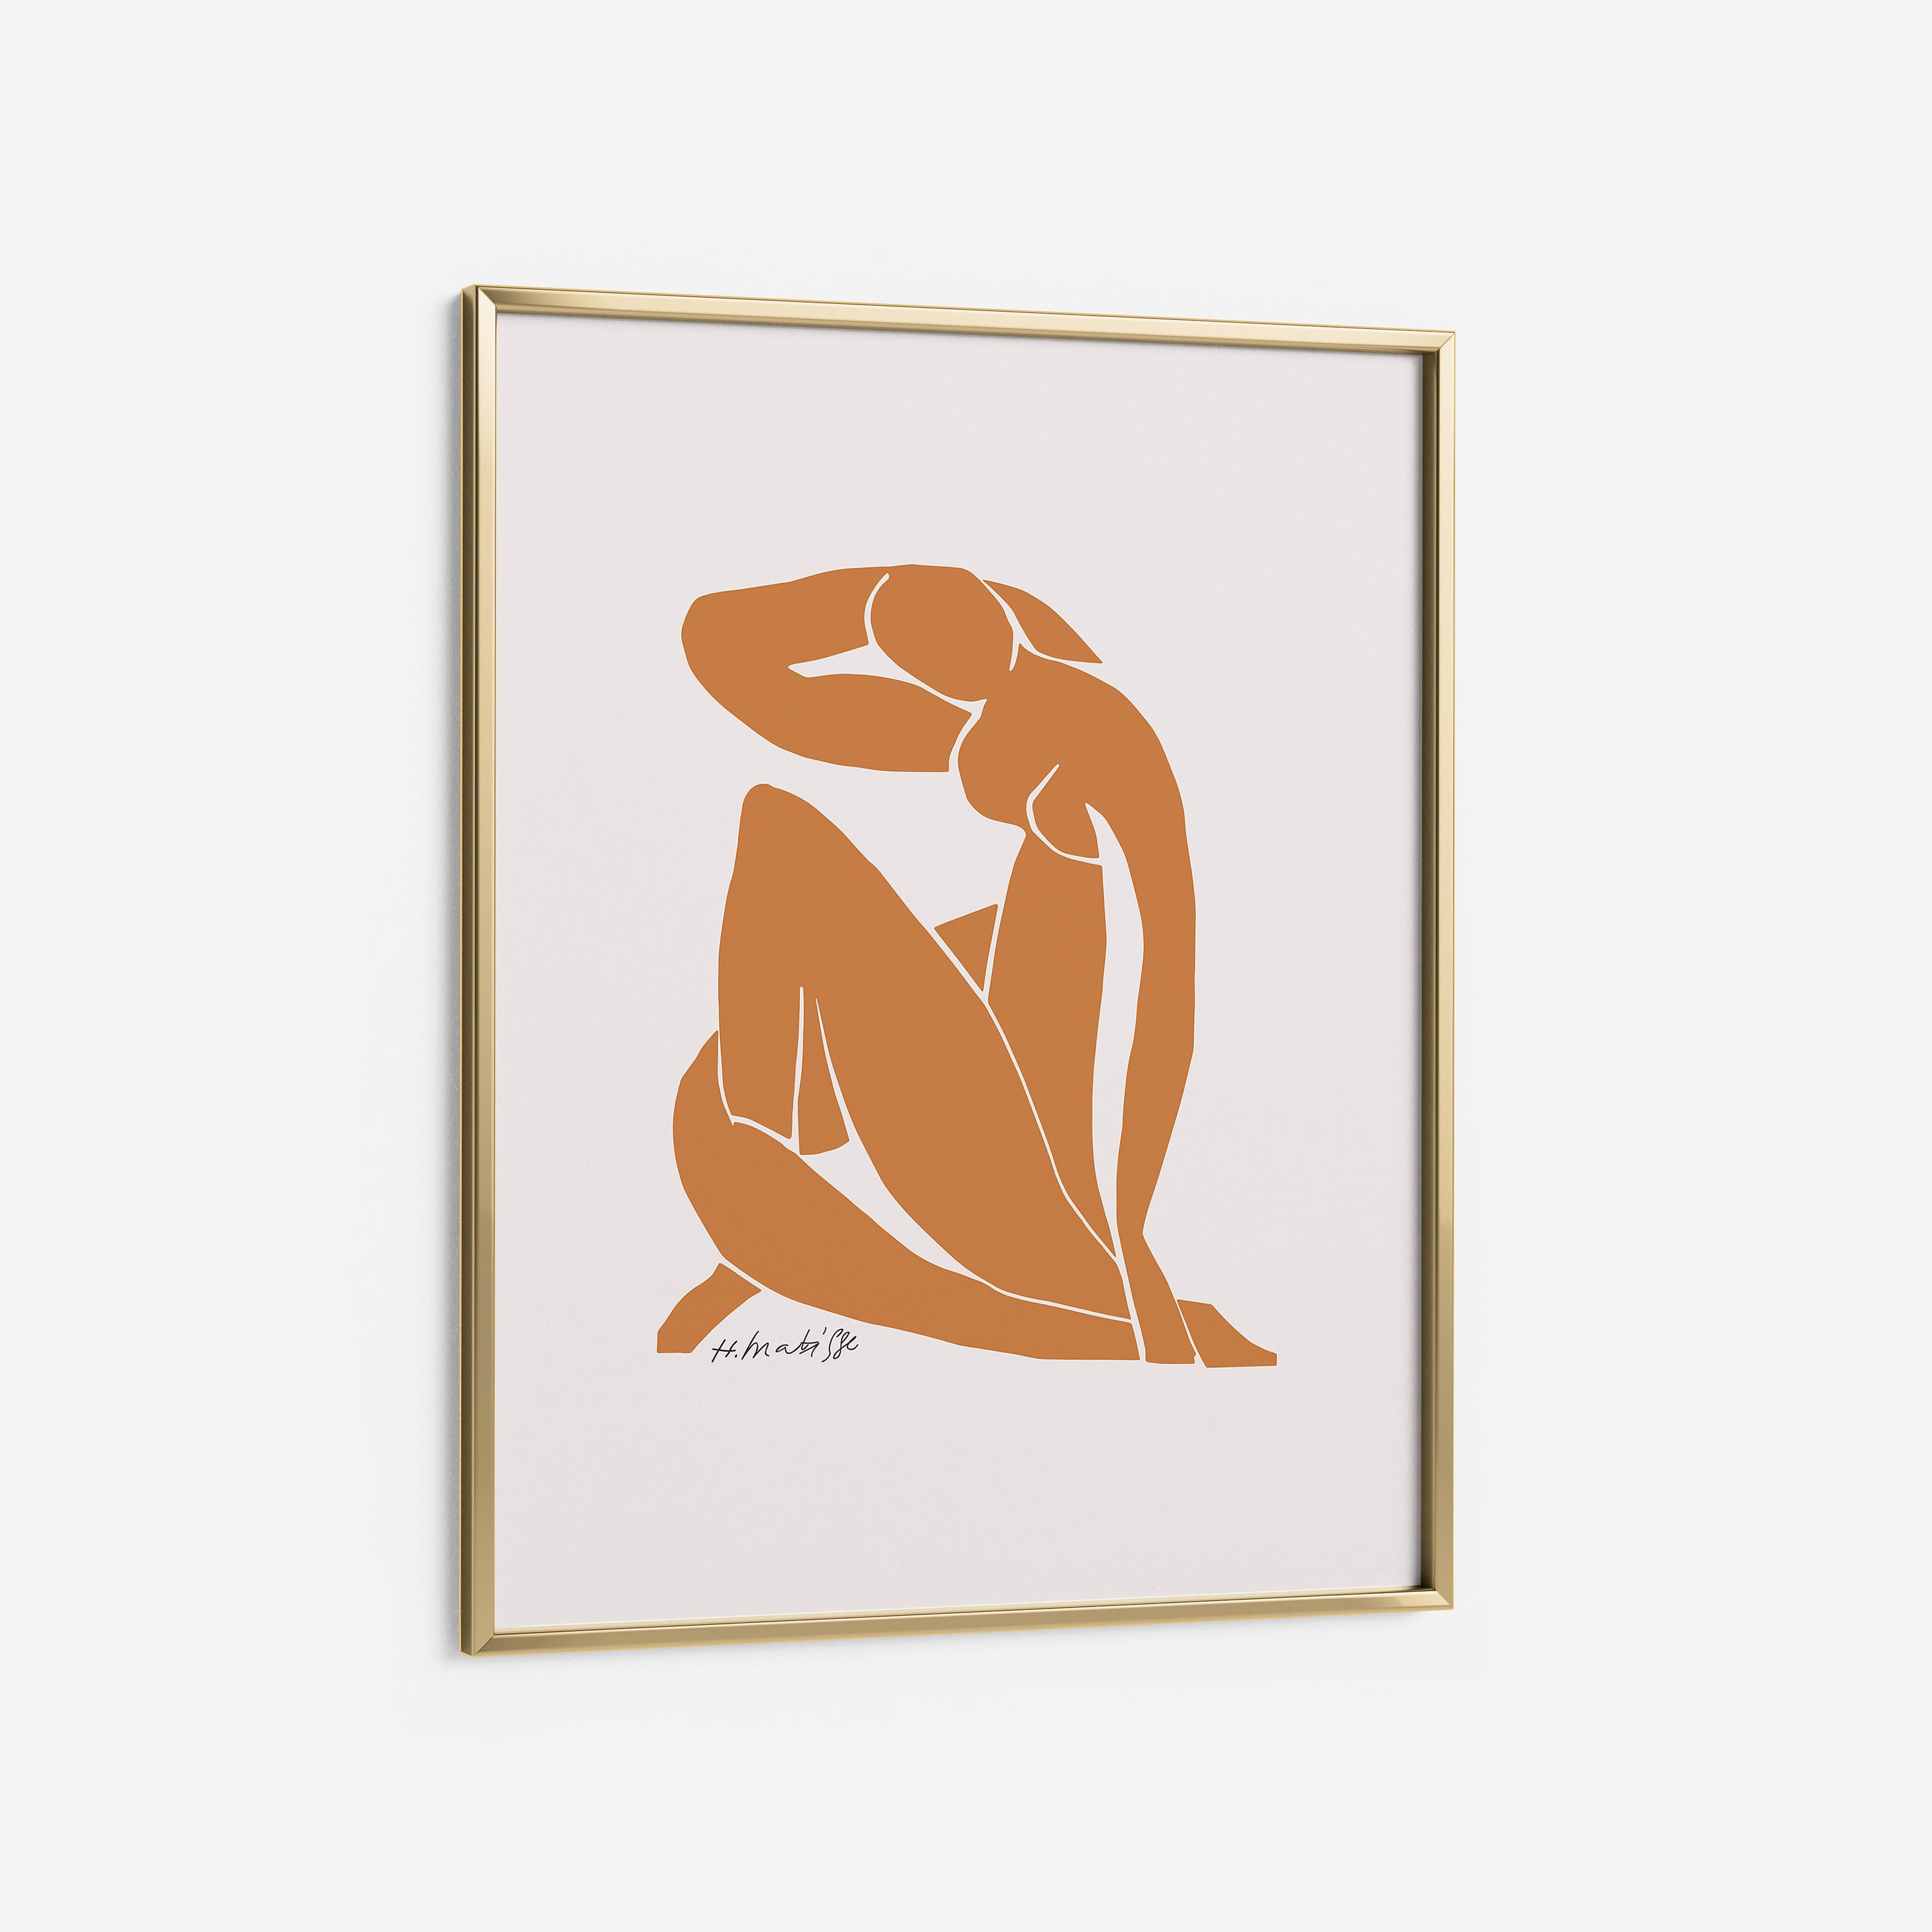 Matisse Print Matisse Wall Art Poster Lady Knelt In Burnt | Etsy